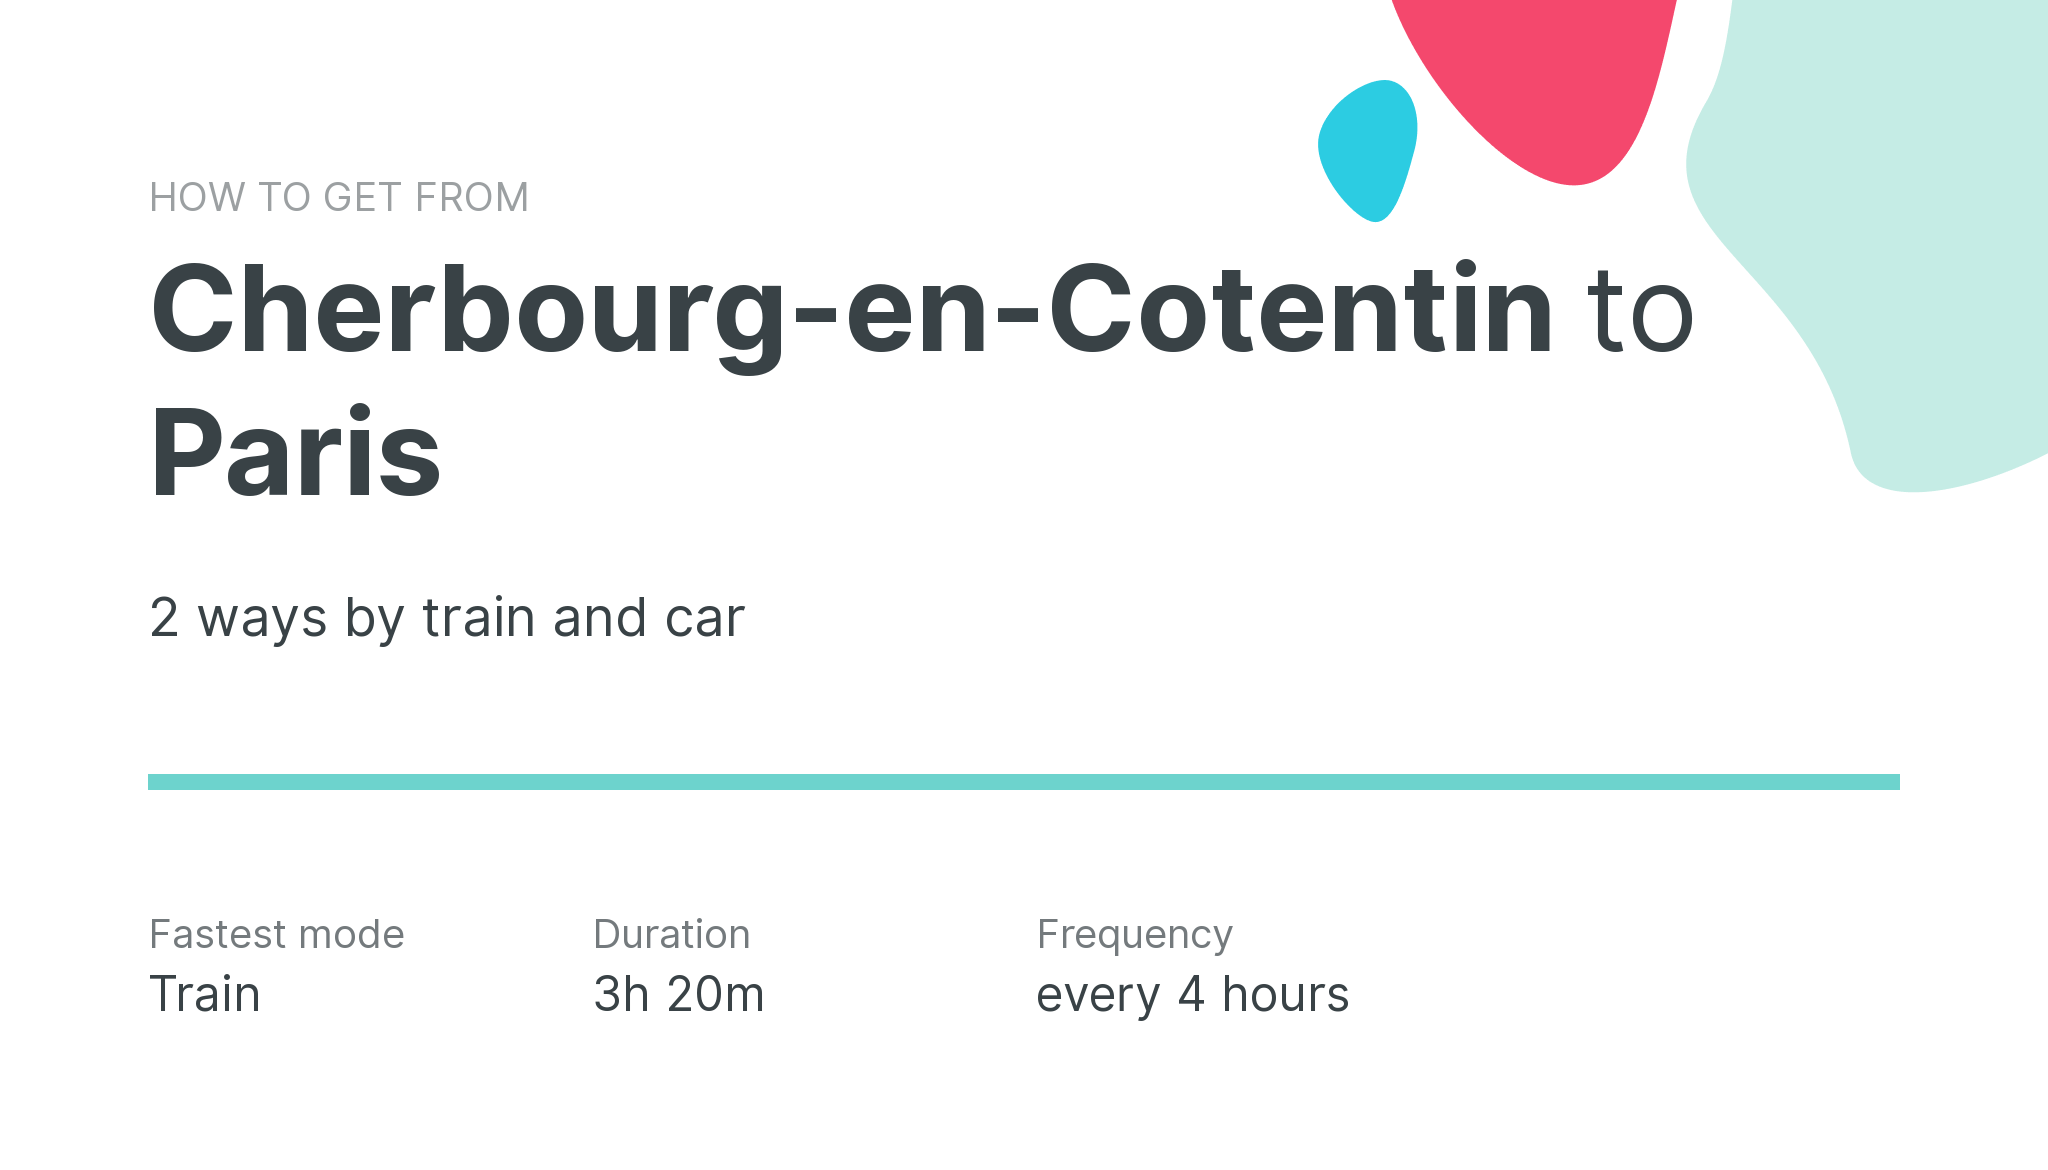 How do I get from Cherbourg-en-Cotentin to Paris